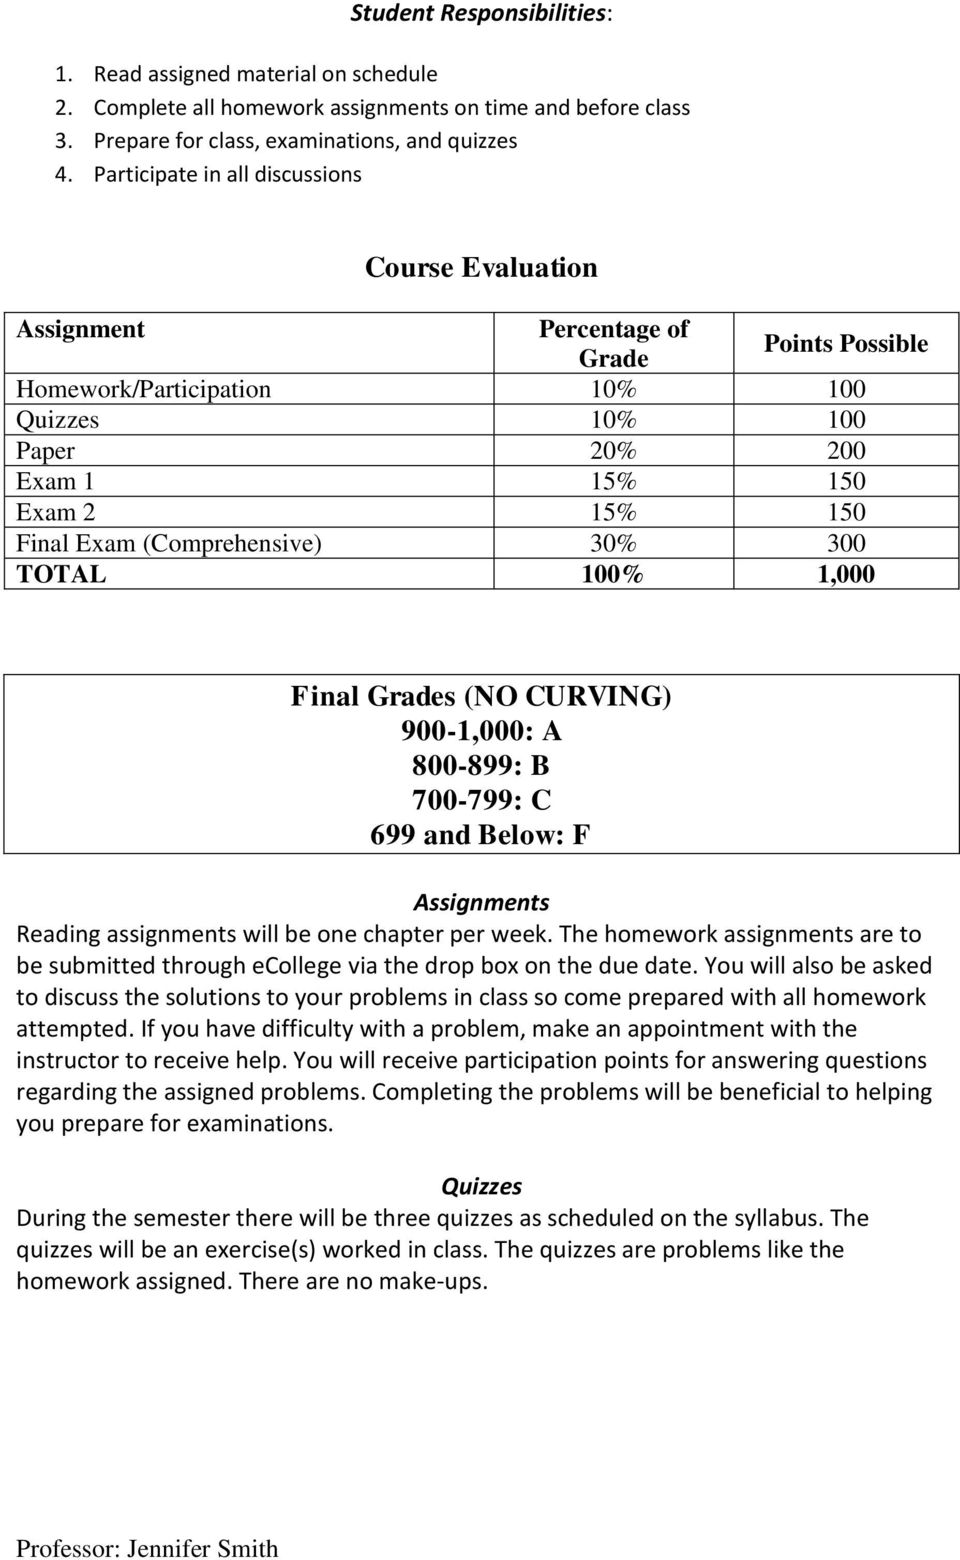 (Comprehensive) 30% 300 TOTAL 100% 1,000 Final Grades (NO CURVING) 900-1,000: A 800-899: B 700-799: C 699 and Below: F Assignments Reading assignments will be one chapter per week.